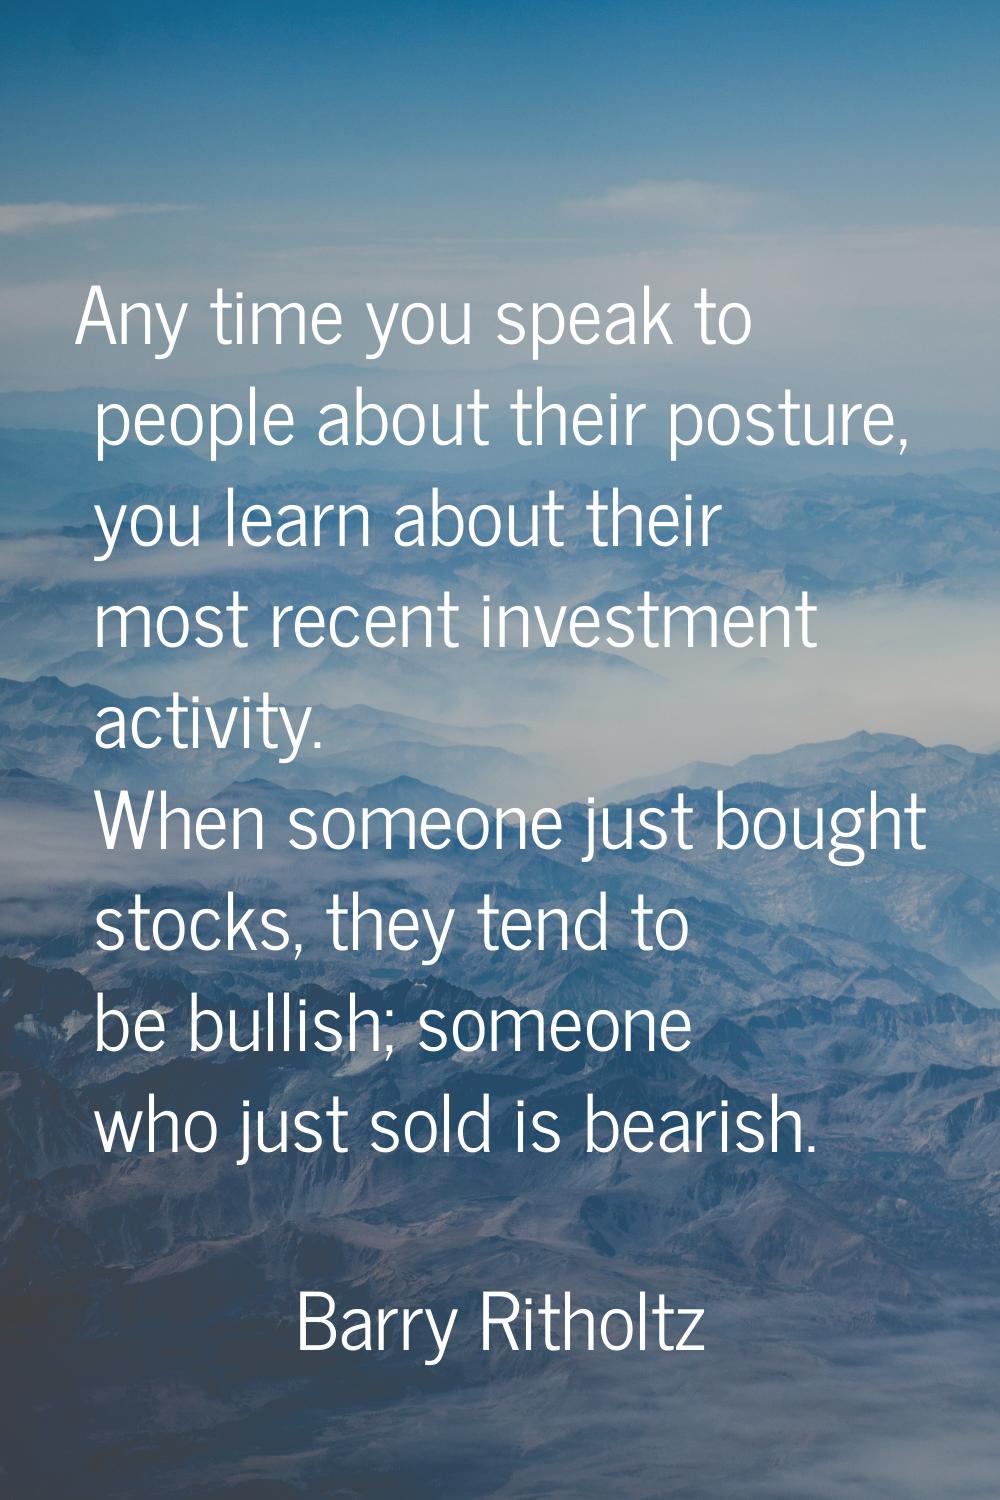 Any time you speak to people about their posture, you learn about their most recent investment acti